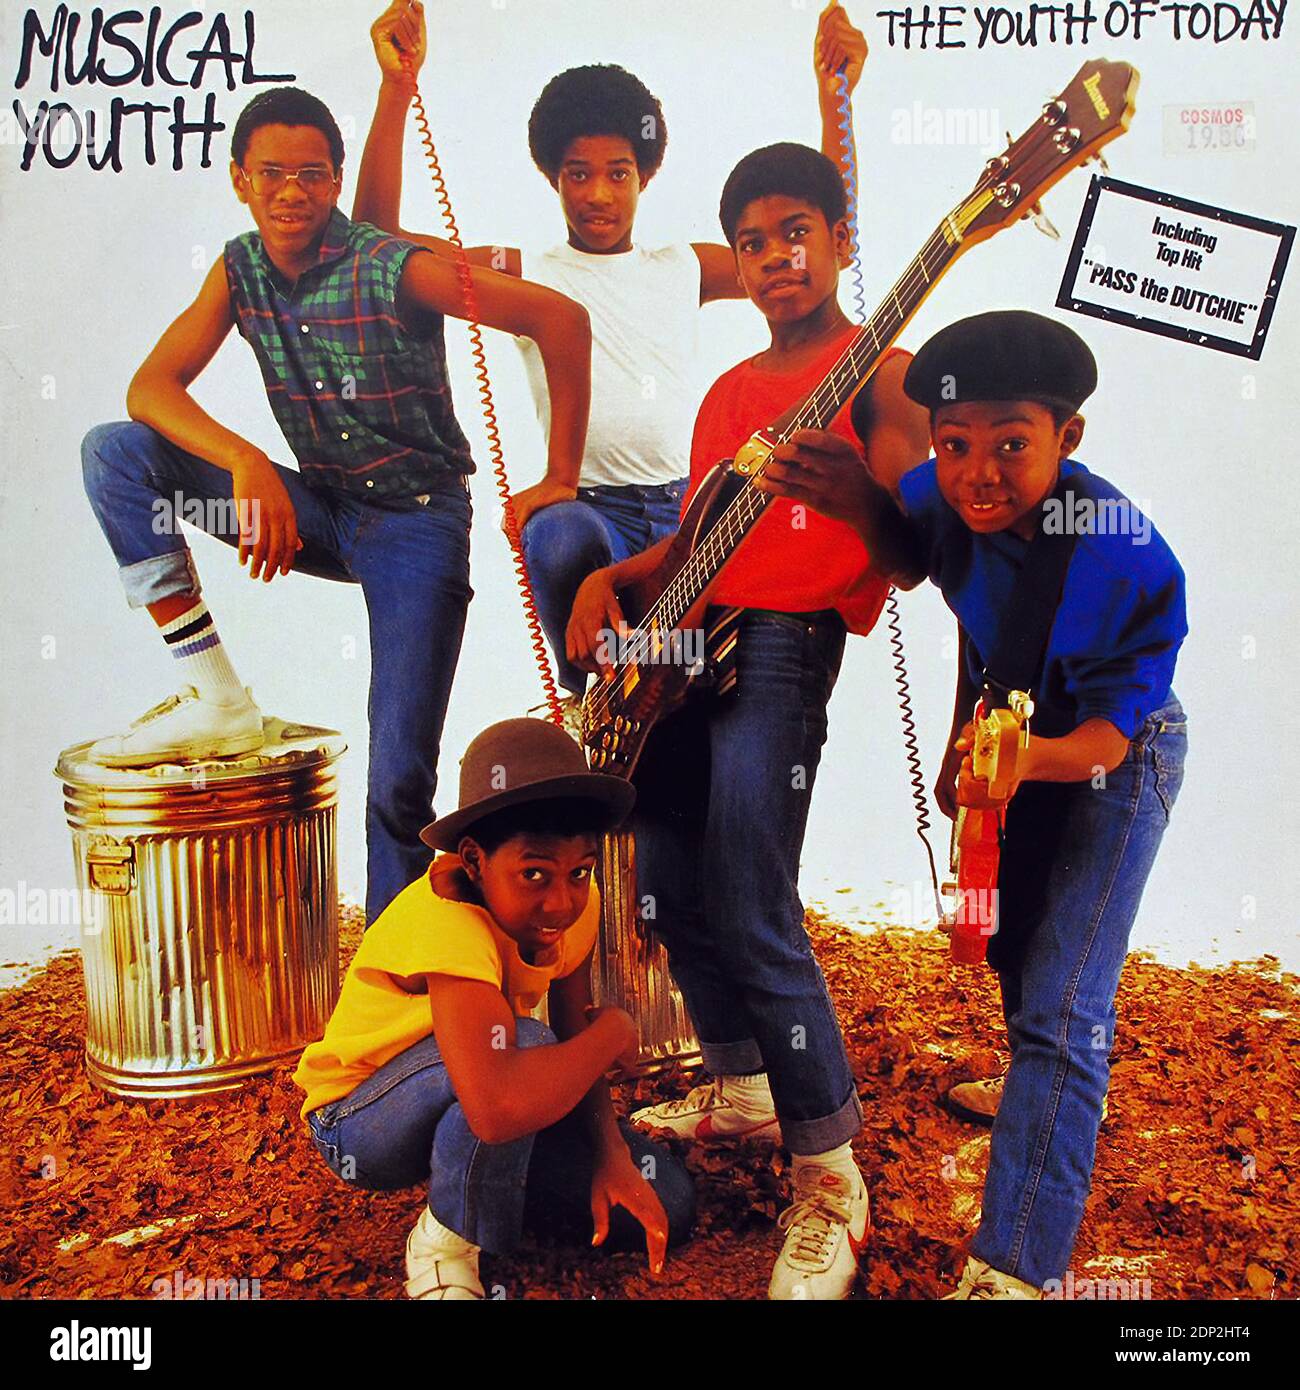 MUSICAL YOUTH THE YOUTH OF TODAY + LARGE POSTER NM NM 12  LP  - Vintage Vinyl Record Cover Stock Photo